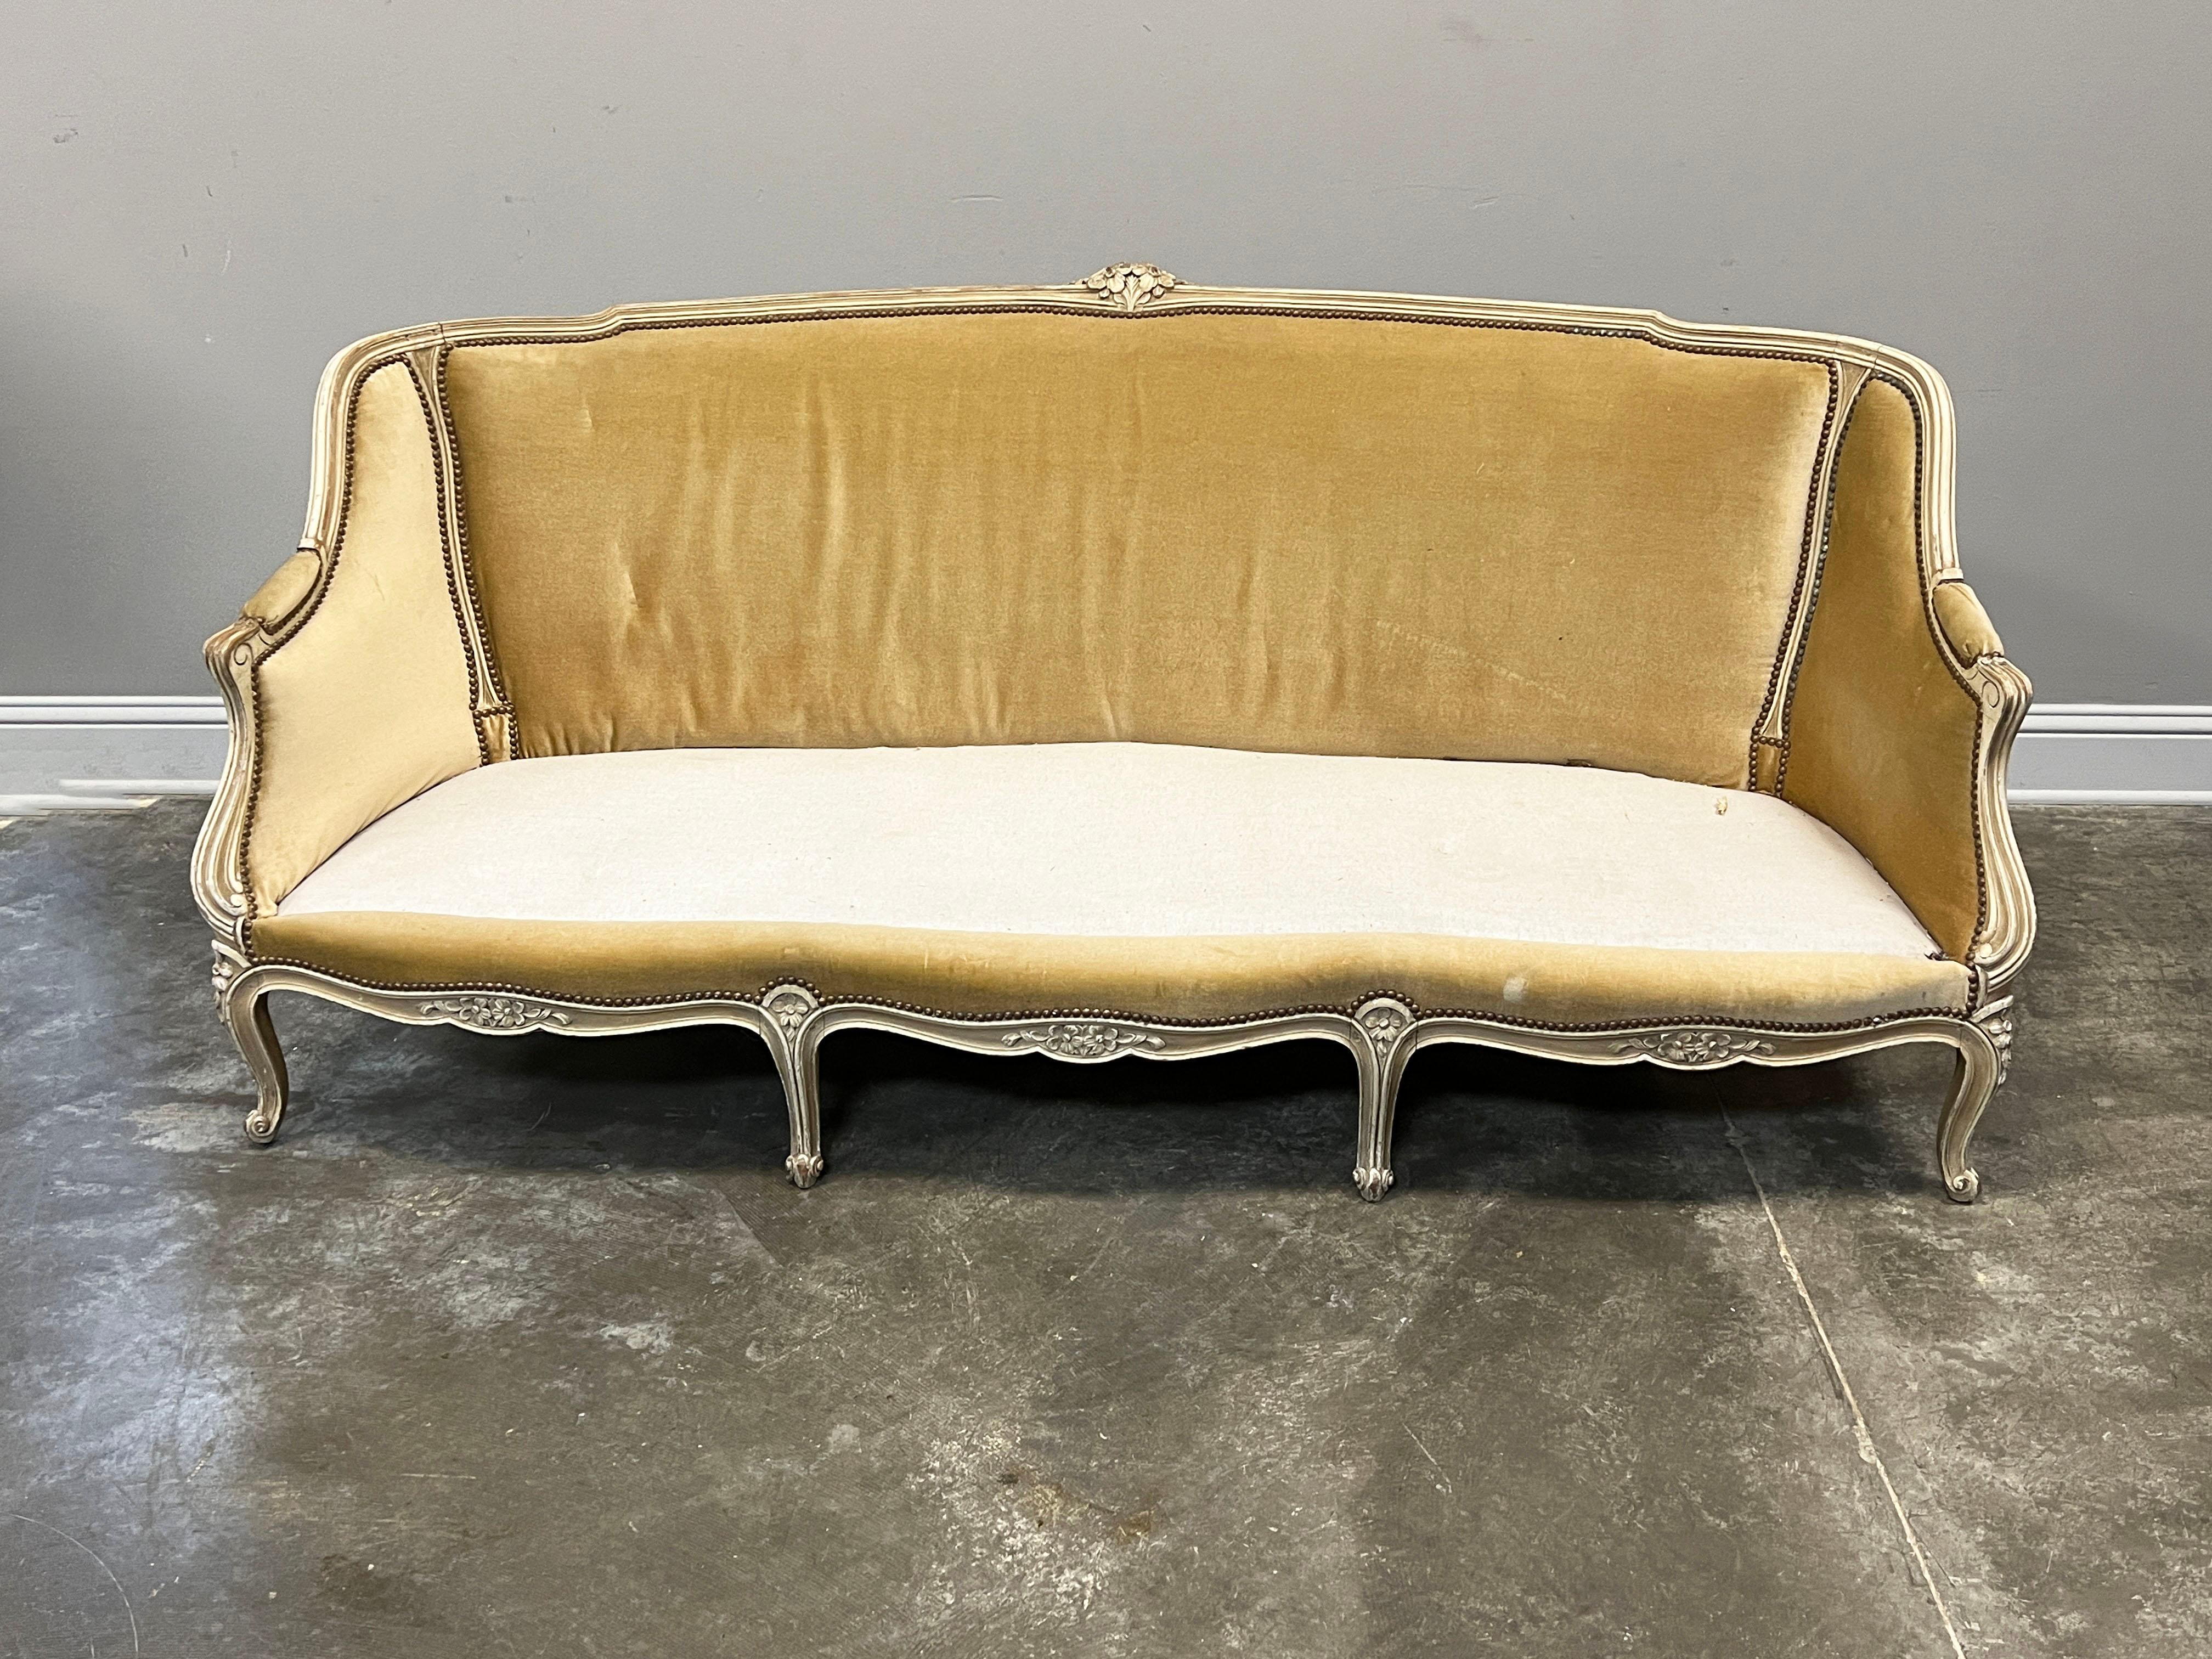 Antique 20th century French Louis XV style carved wood canape with original paint. Canape has lovely carved floral accents along the frame, top and bottom, along with eight cabriole legs consistent with the Louis XV style. Original velvet upholstery